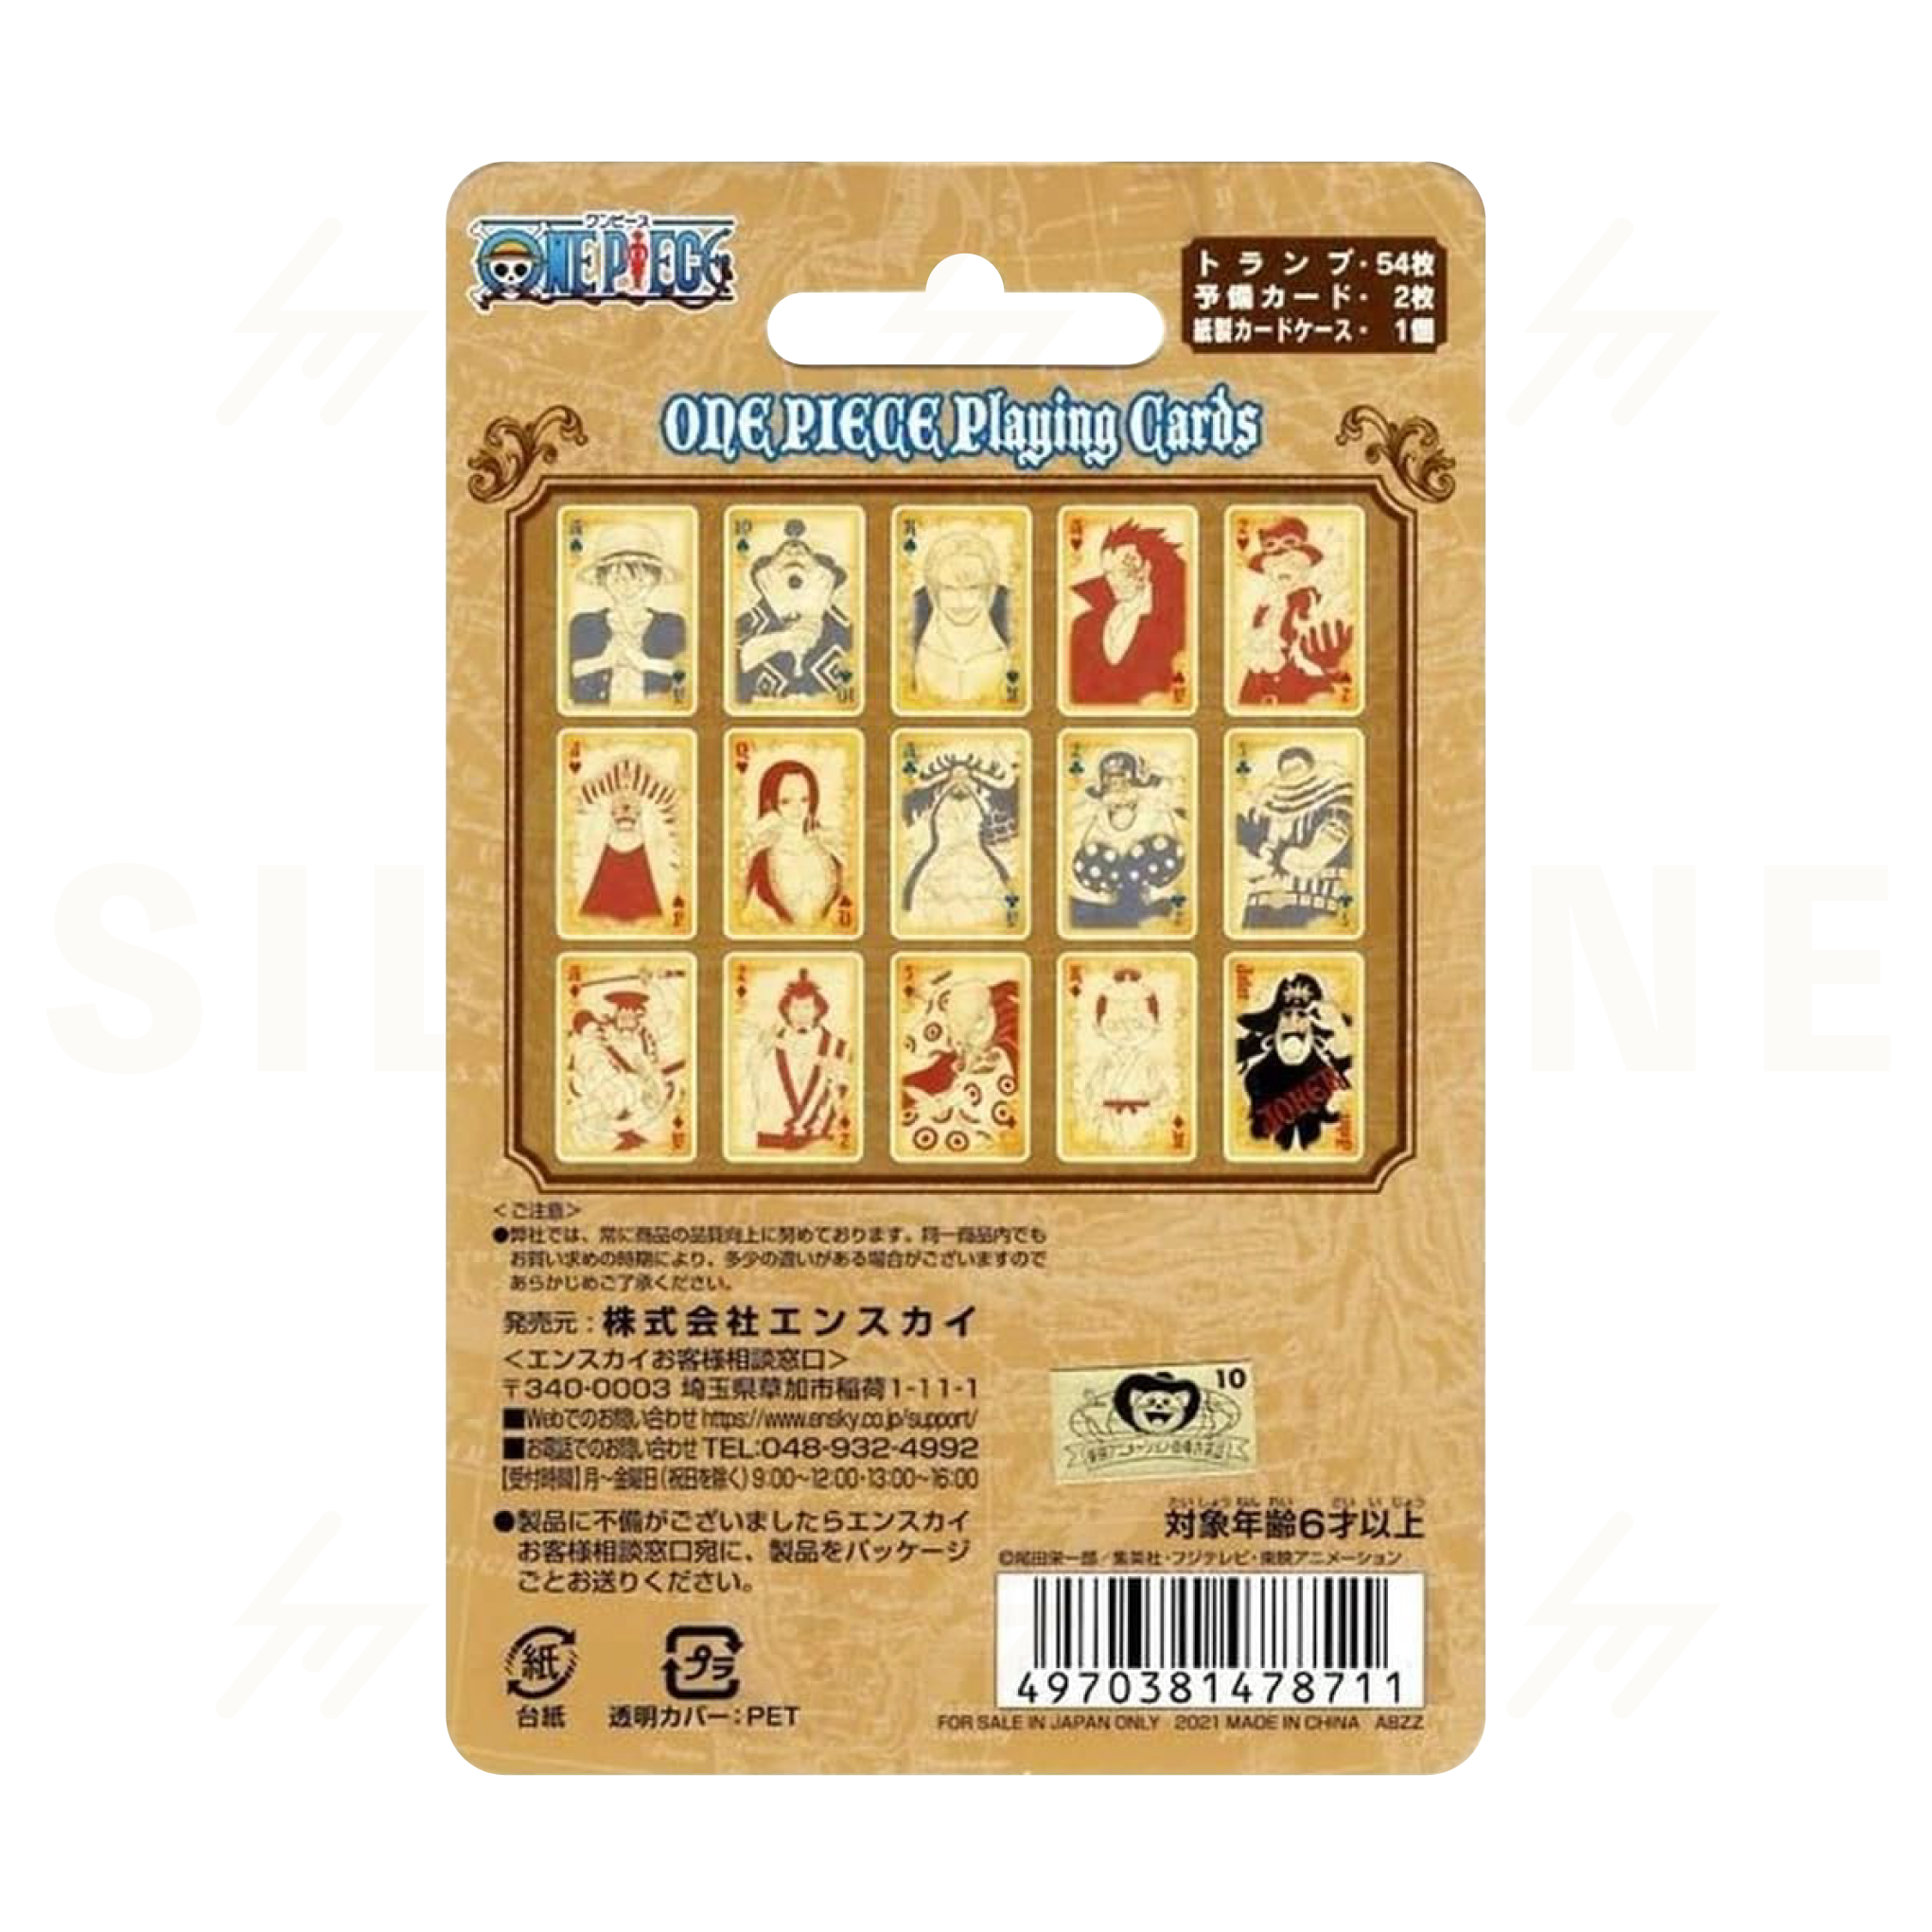 ENSKY - One Piece Playing Cards